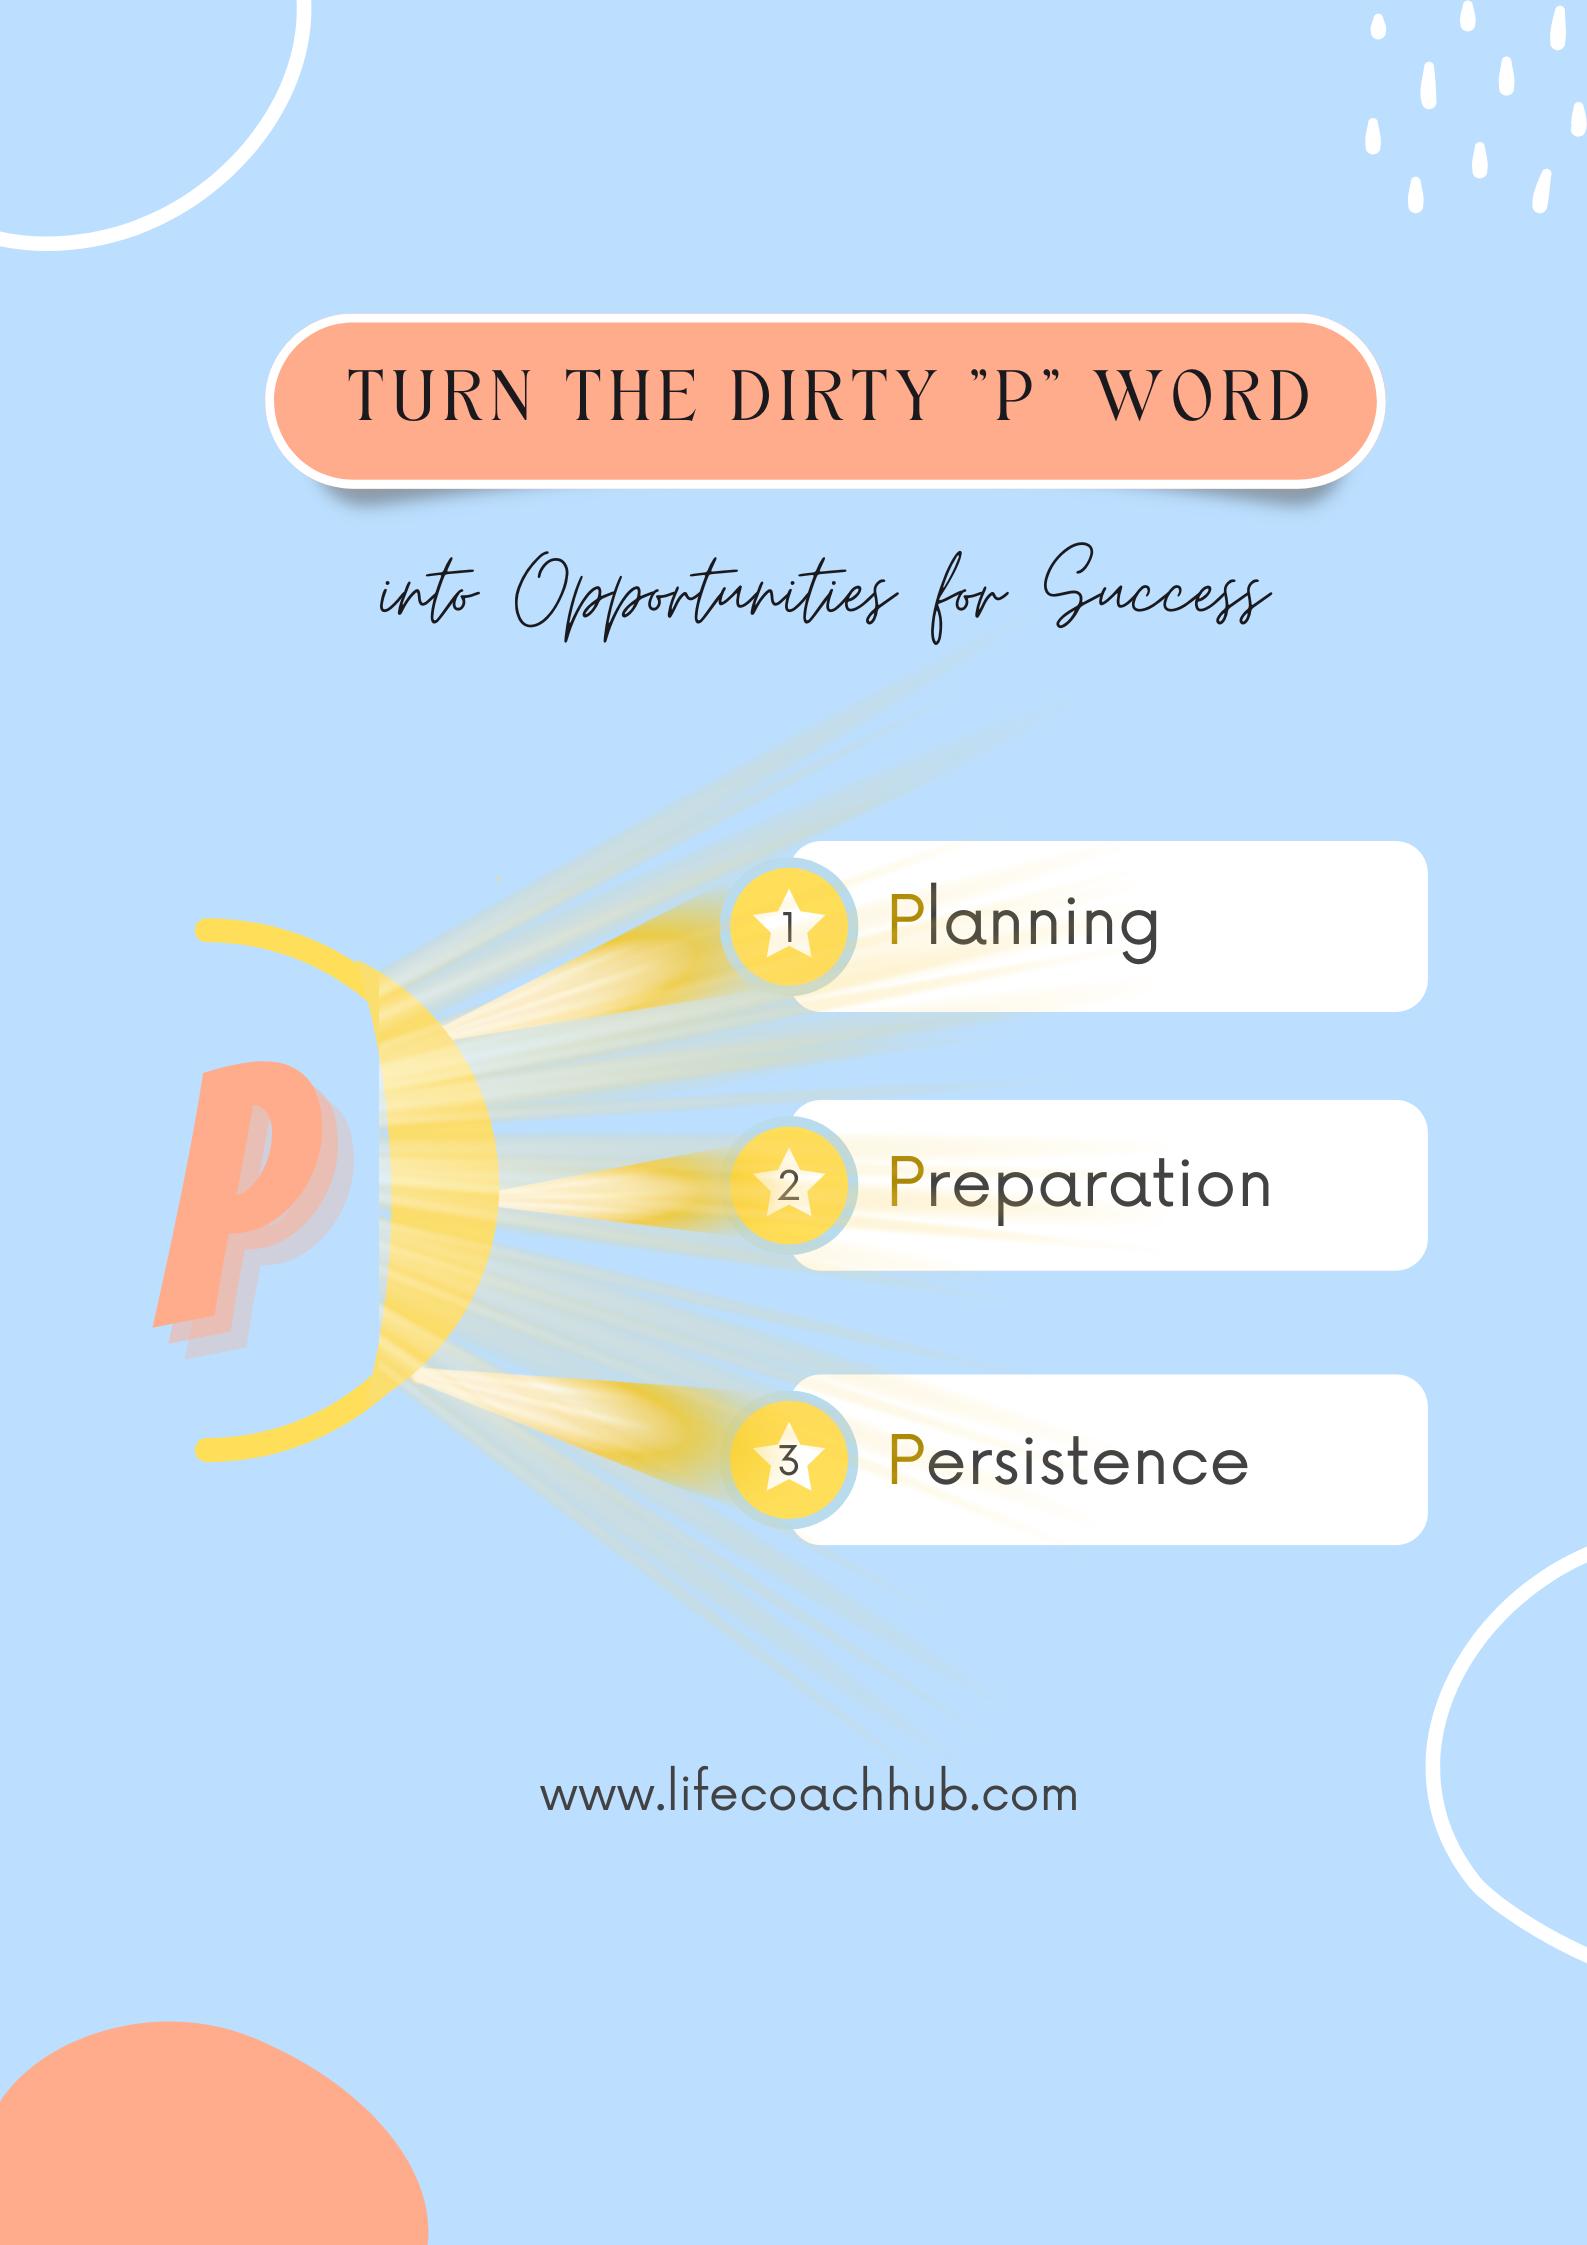 Turn the dirty p word to success